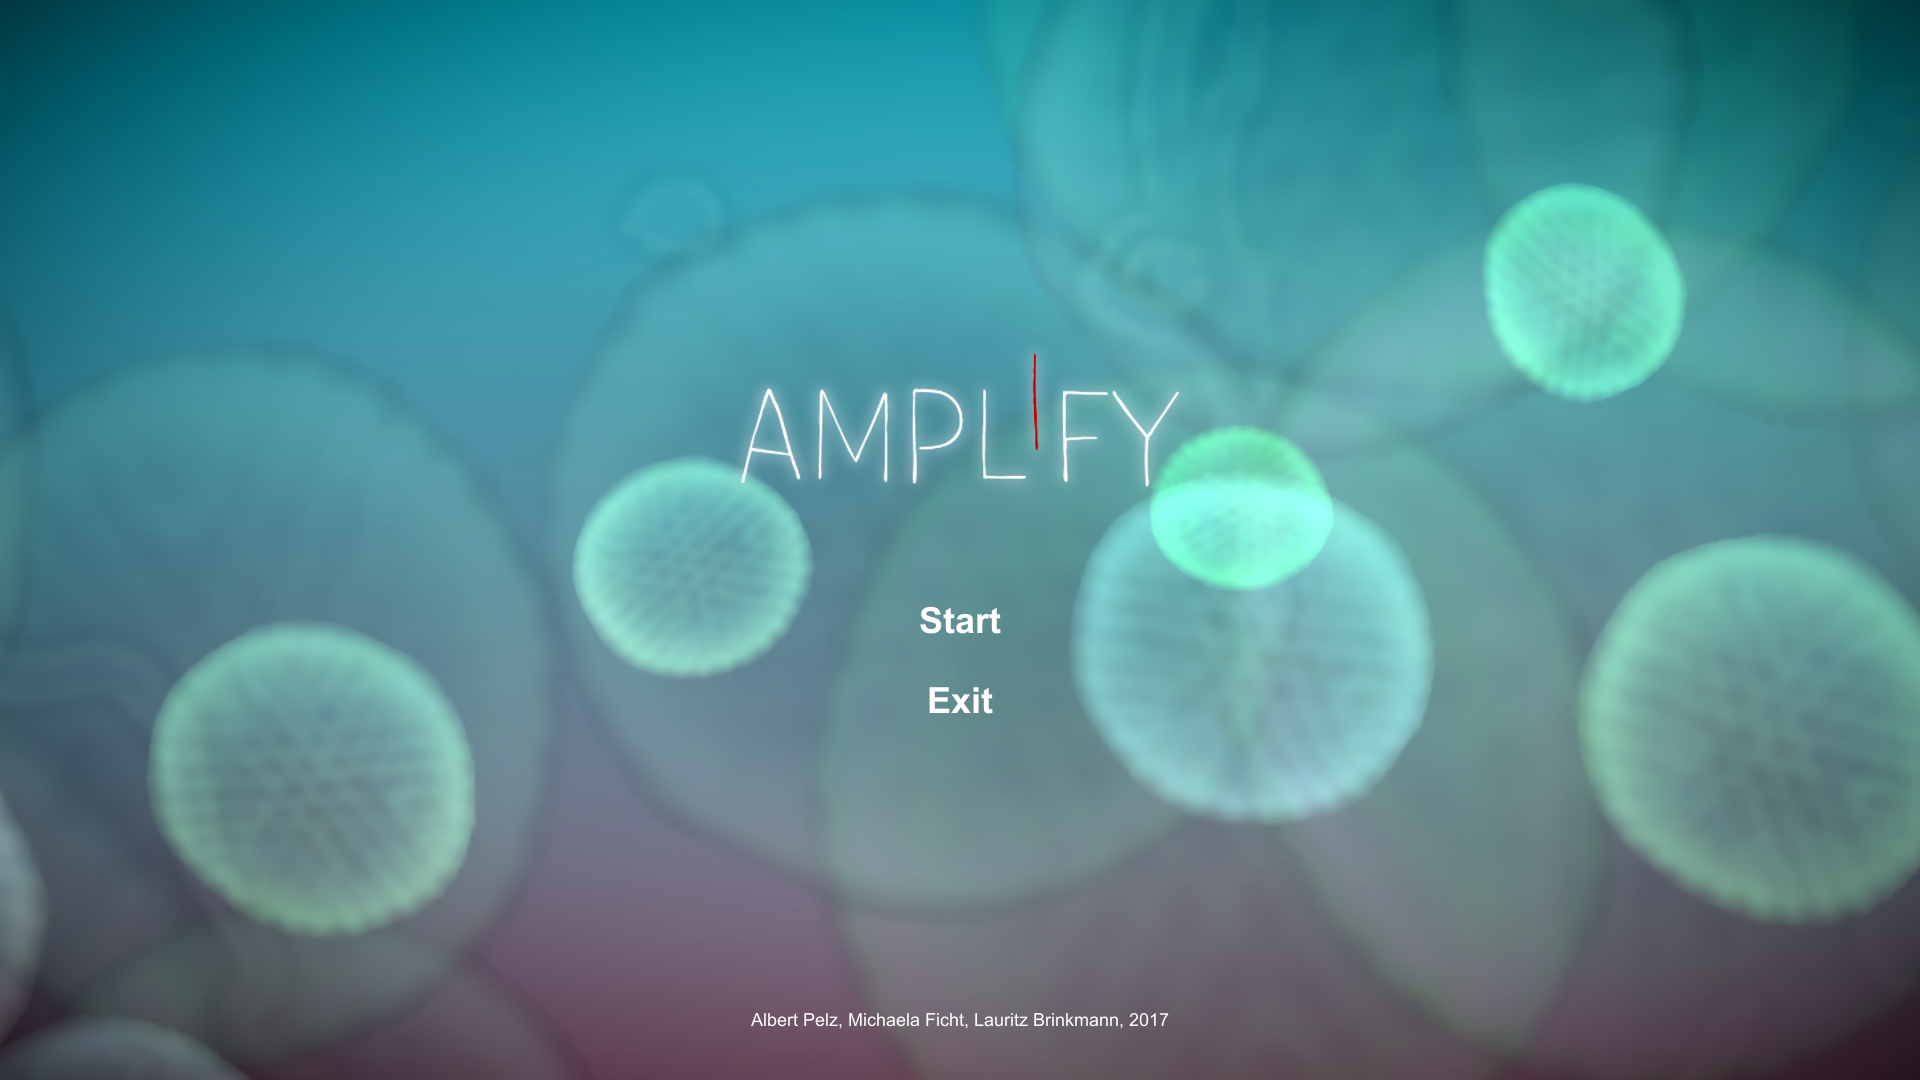 Screenshot of the game 'Amplify' that shows the title screen. In the center of the screen, the name 'Amplify', a start button and an exit button are displayed. The background shows microscopic appearing objects in front of a vertical color gradient.